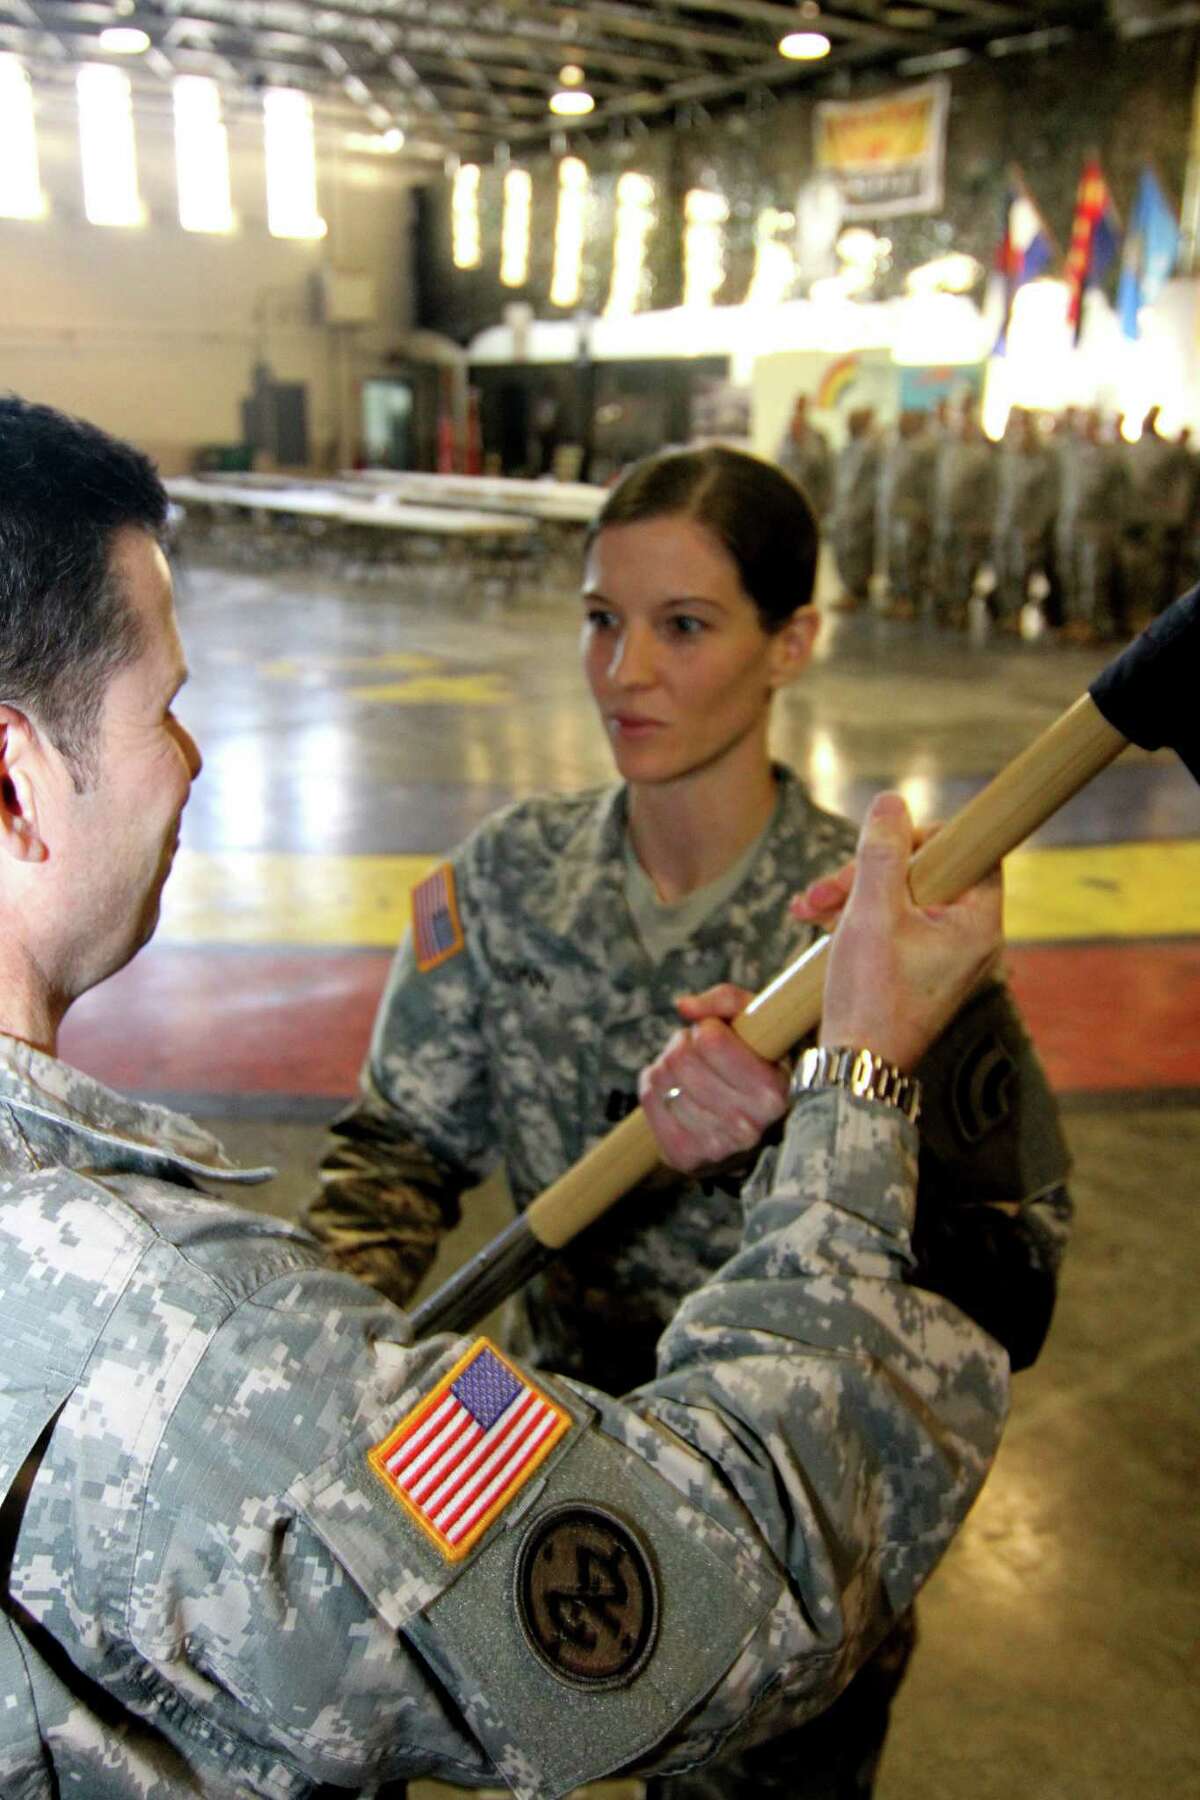 Lt. Col. Christopher Panzer, the battalion commander, passes the guidon to Capt. Amanda Ponn as she assumes command the 42nd Infantry Division Headquarters Support Company, New York Army National Guard.